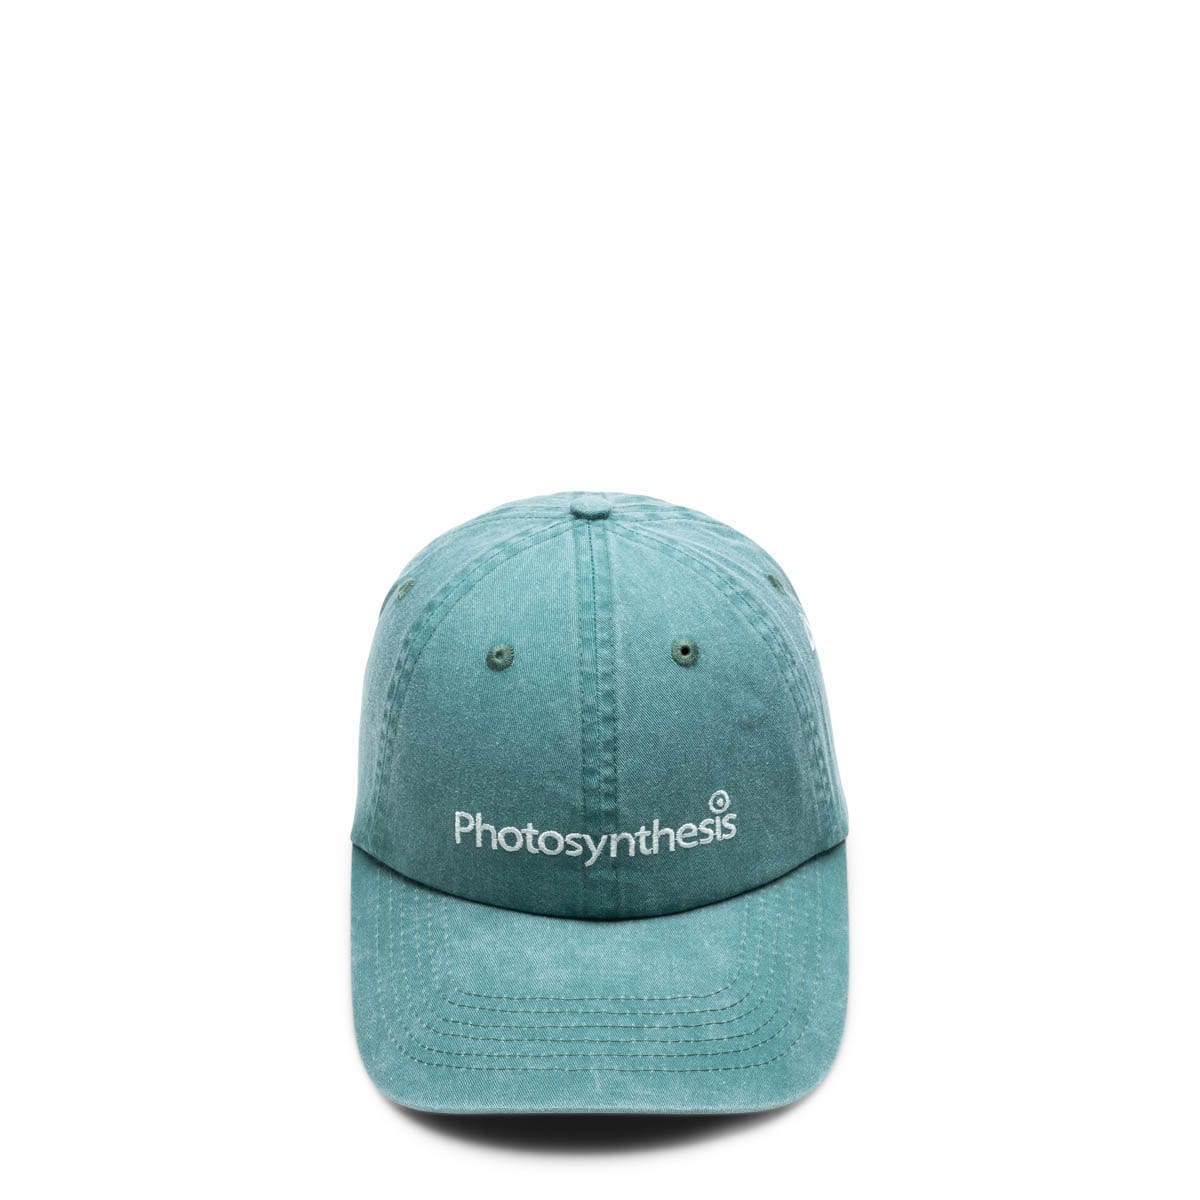 Perks and Mini Headwear CYPRESS / O/S PHOTOSYNTHESIS VINTAGE WASHED BASEBALL CAP